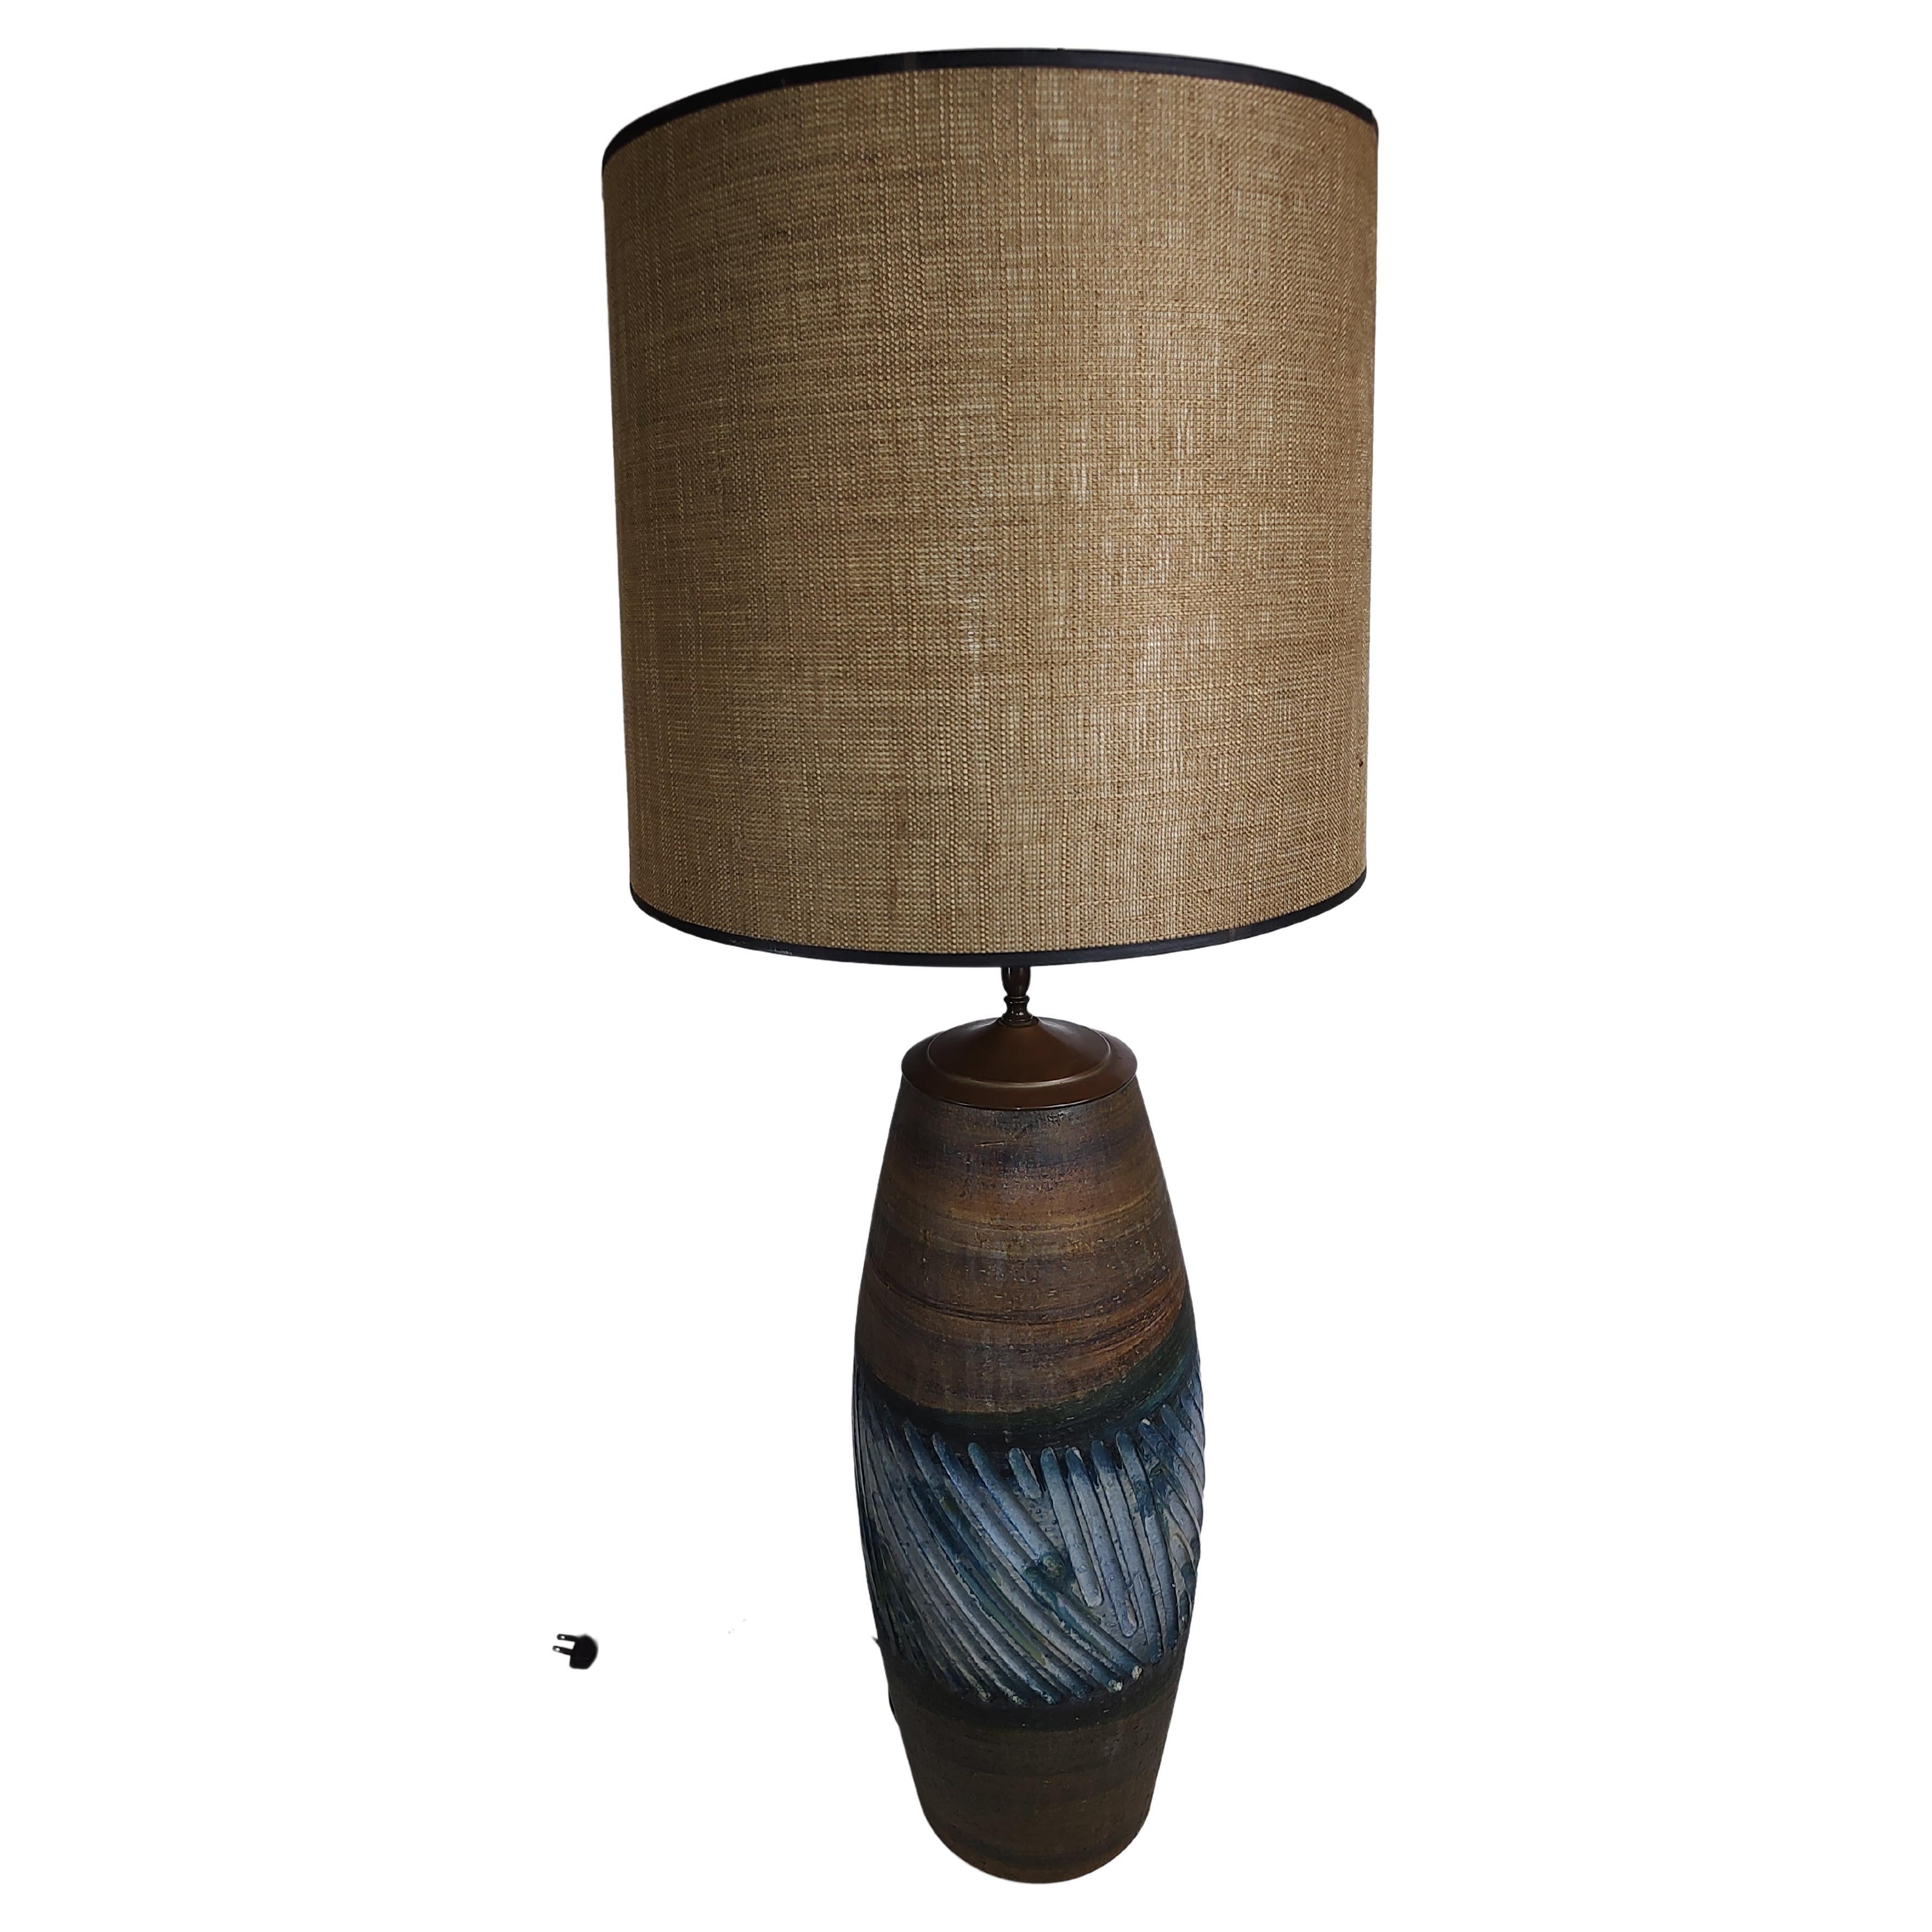 Italian Mid-Century Modern Large Sculptural Hand Thrown Pottery Table Lamp For Sale